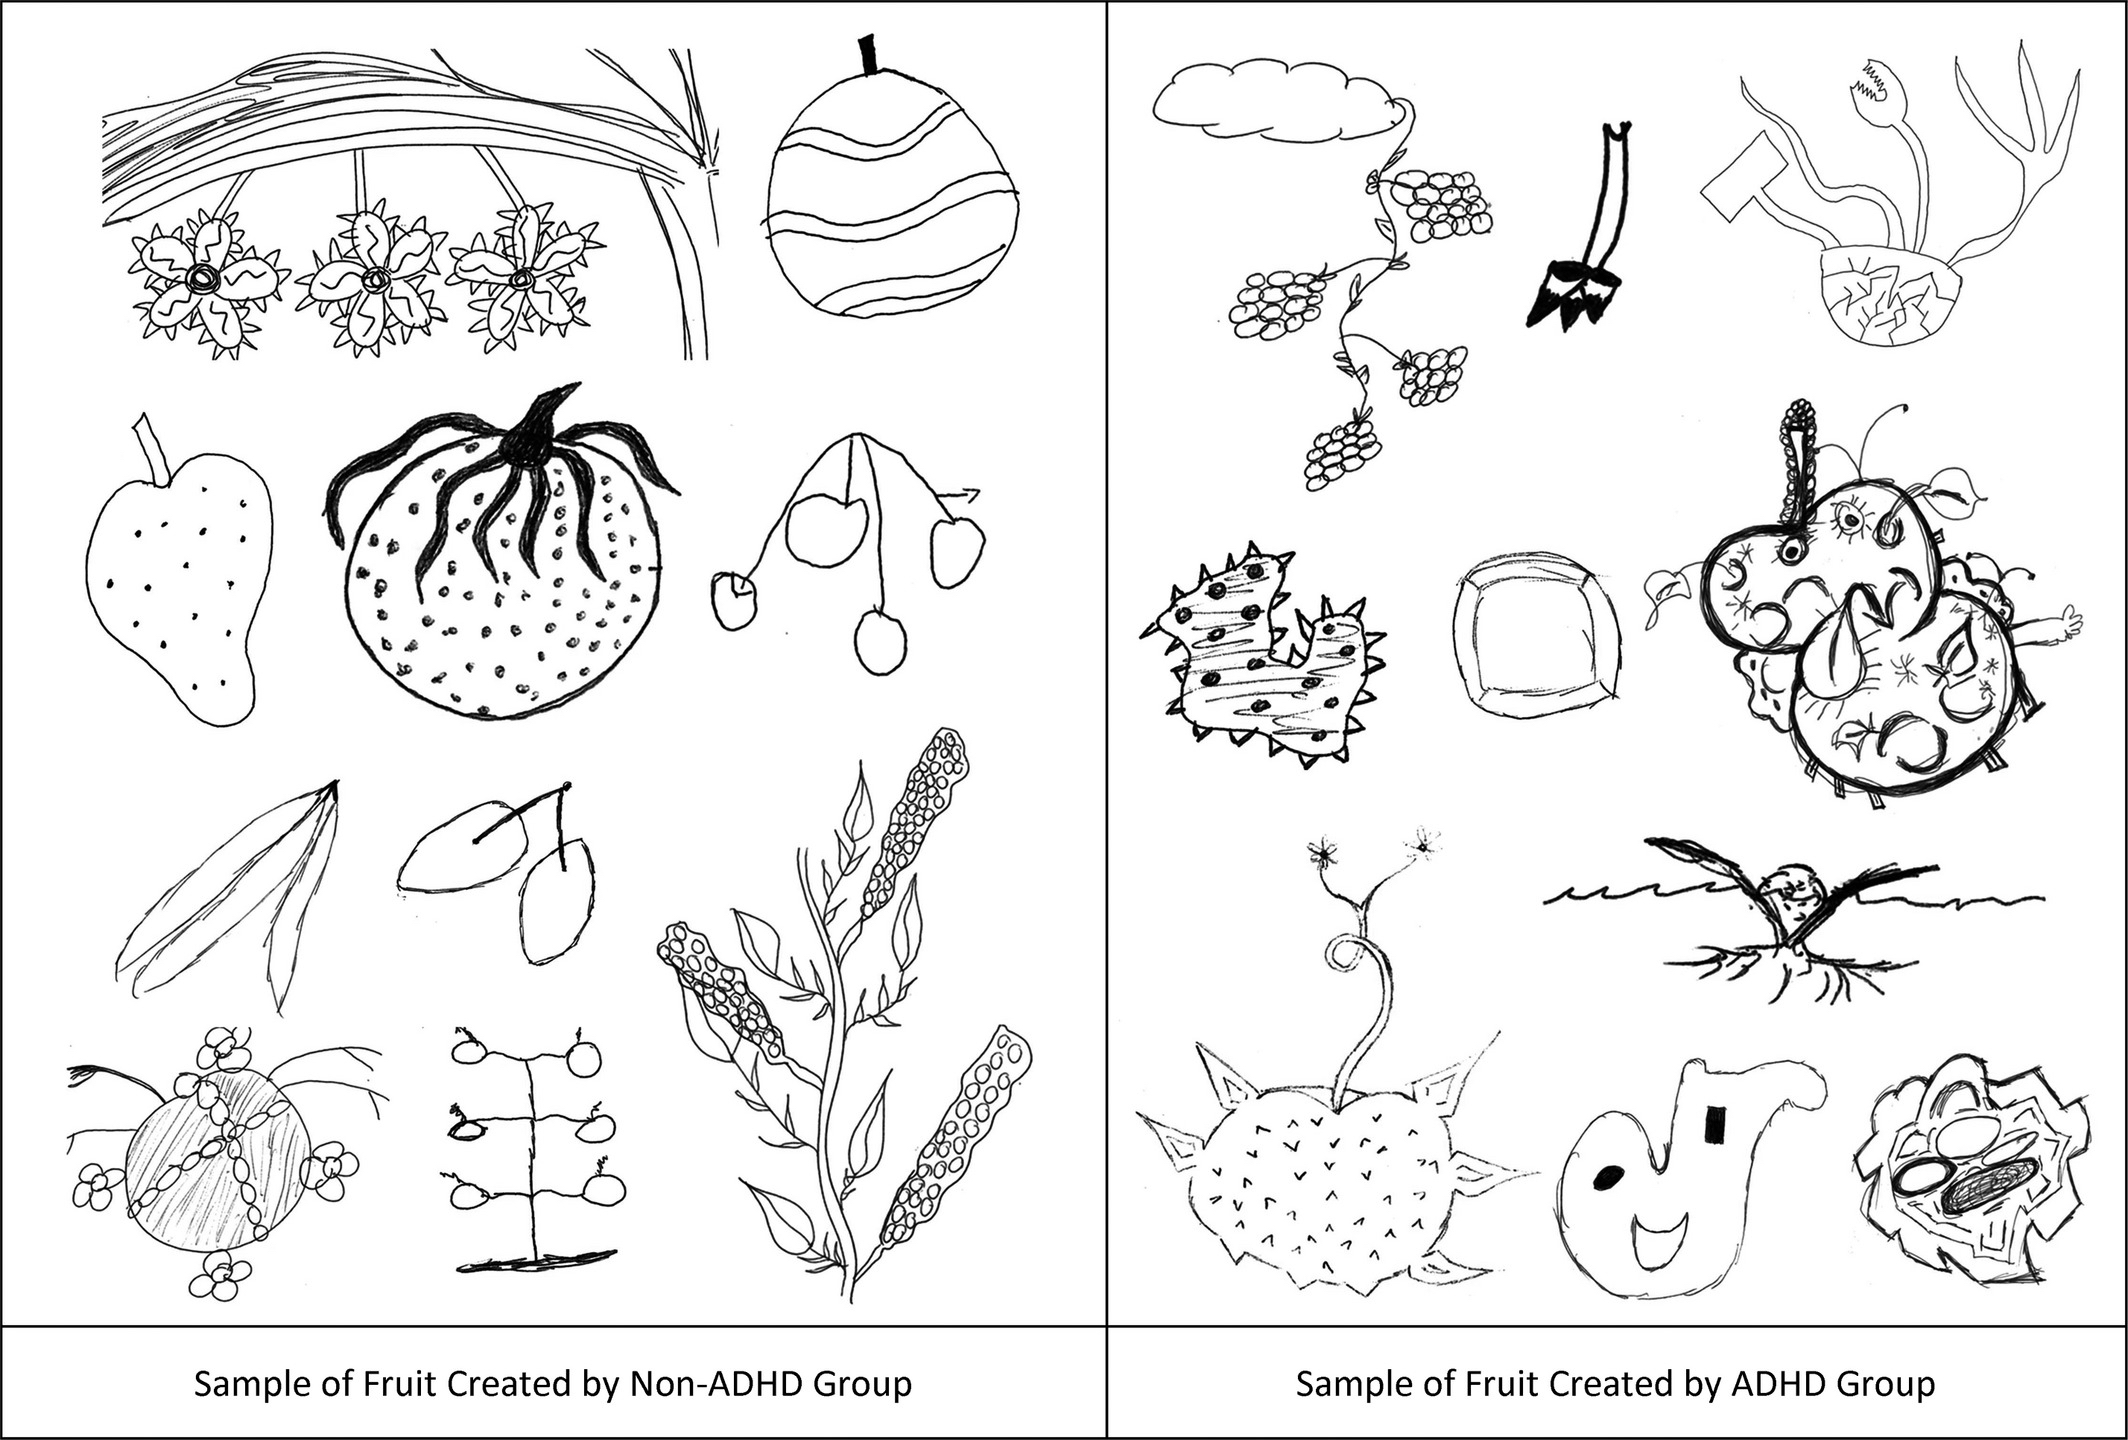 Image shows two sets of drawings of 'alien fruit'. The drawings on the left side are by non-ADHD individuals and look similar to regular fruit. The drawings on the right, by the ADHD group are much more atypical and unique.